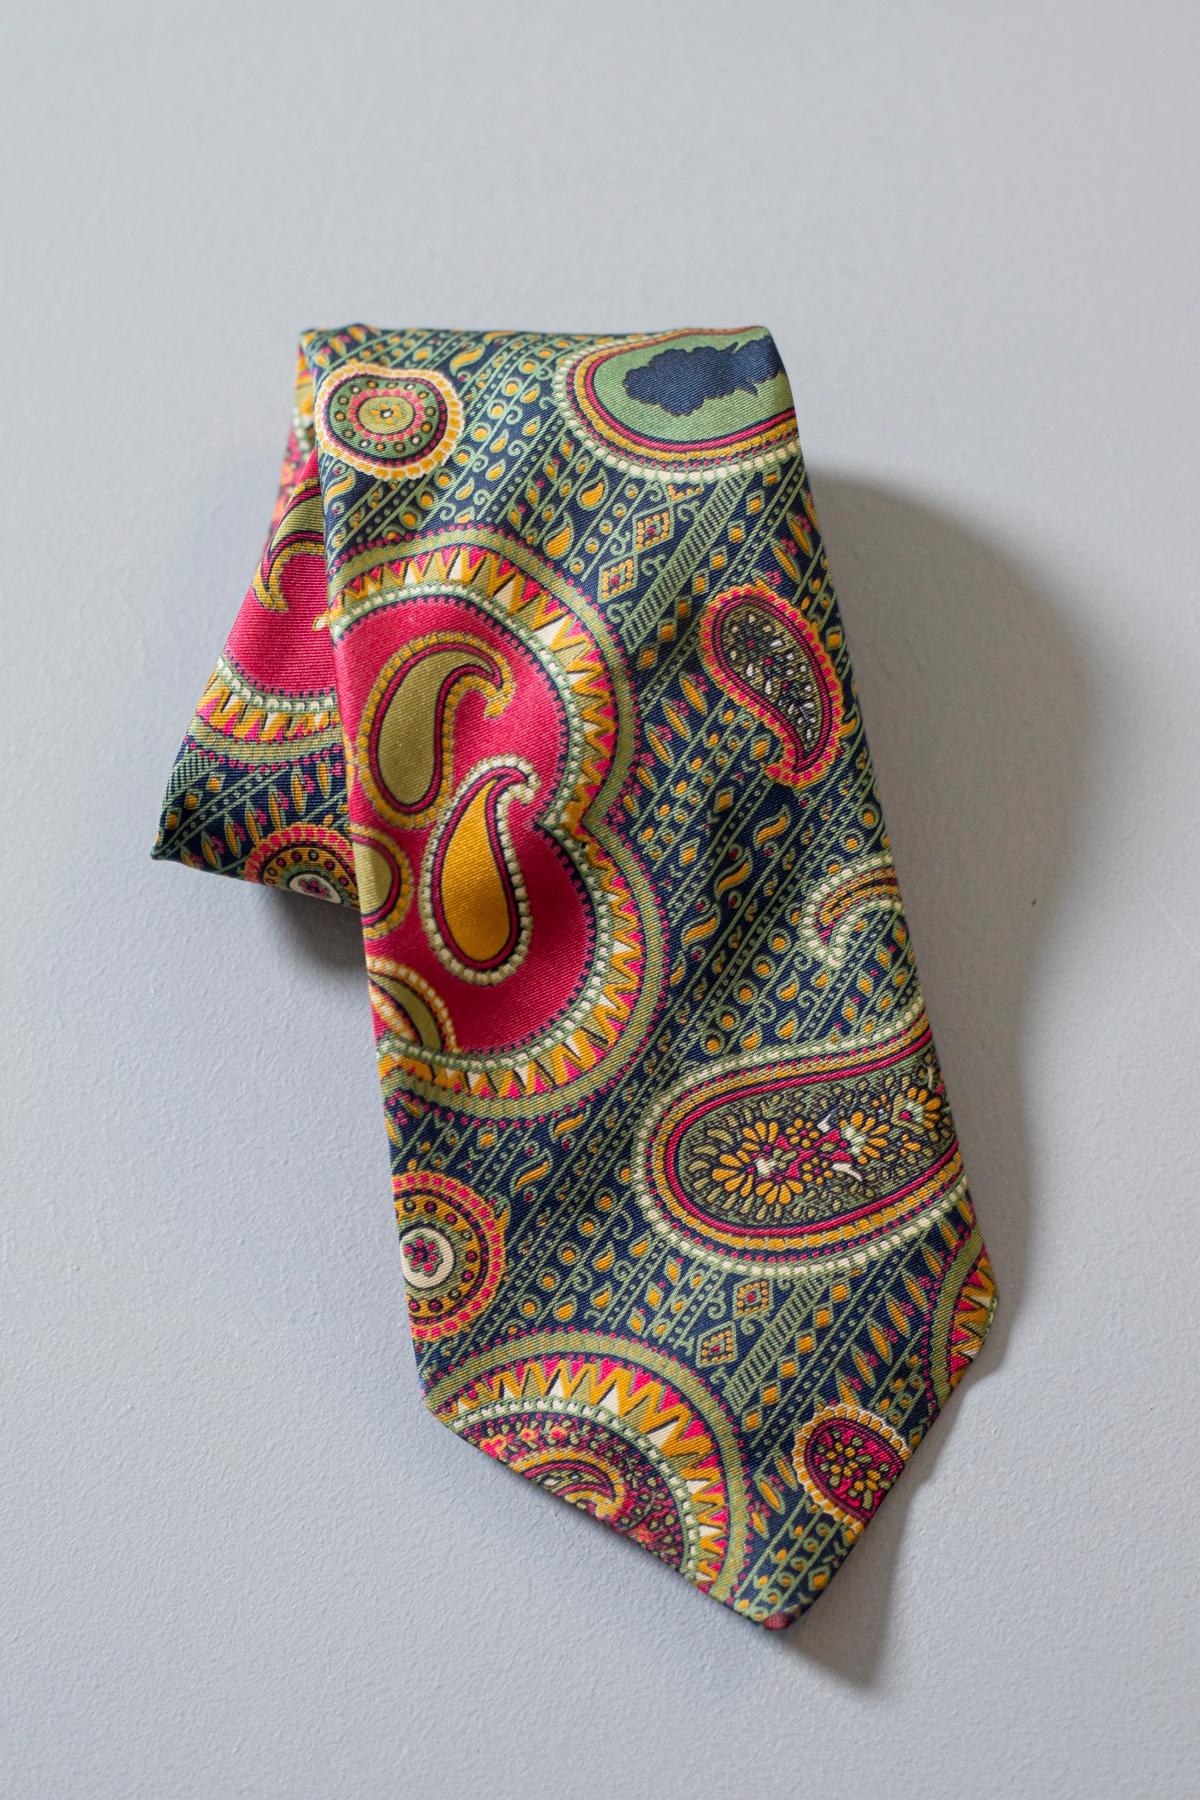 Particular tie designed by Reine Seide, it is made of 100% silk. Colourful and extremely decorated, this tie displays both paisley and geometrical motifs. Thanks to its warm colors it is ideal for a nice spring / summer outdoor evening, giving you a